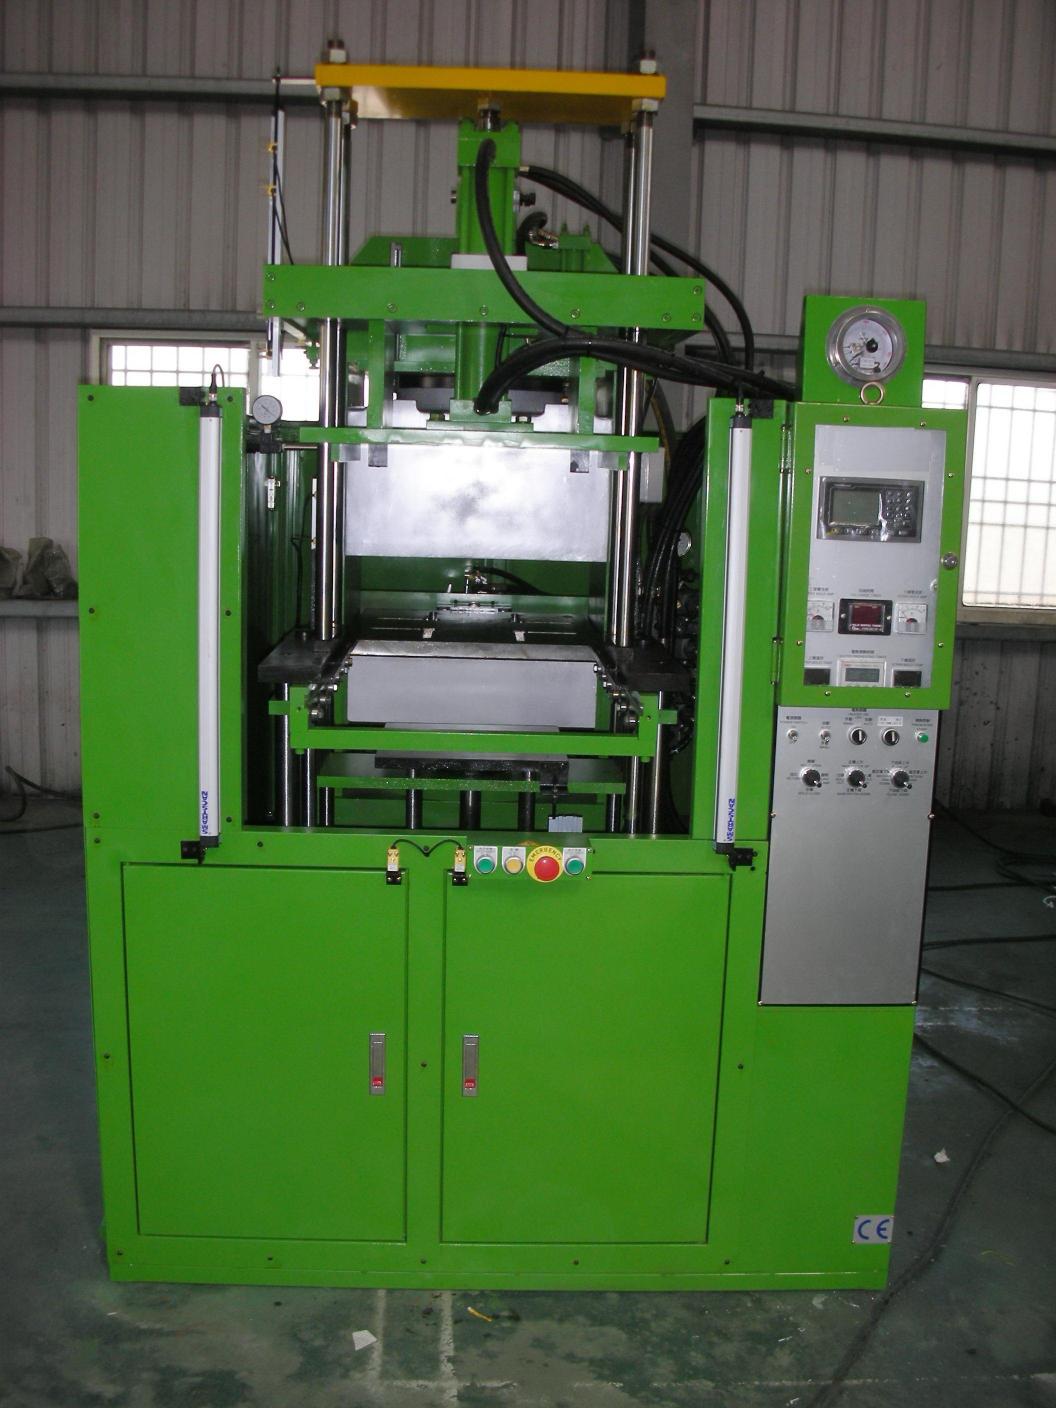 HPV-*-3RT-CEVacuum Type Oil Seal Compression Molding Machine-HPV-*-3RT-CE